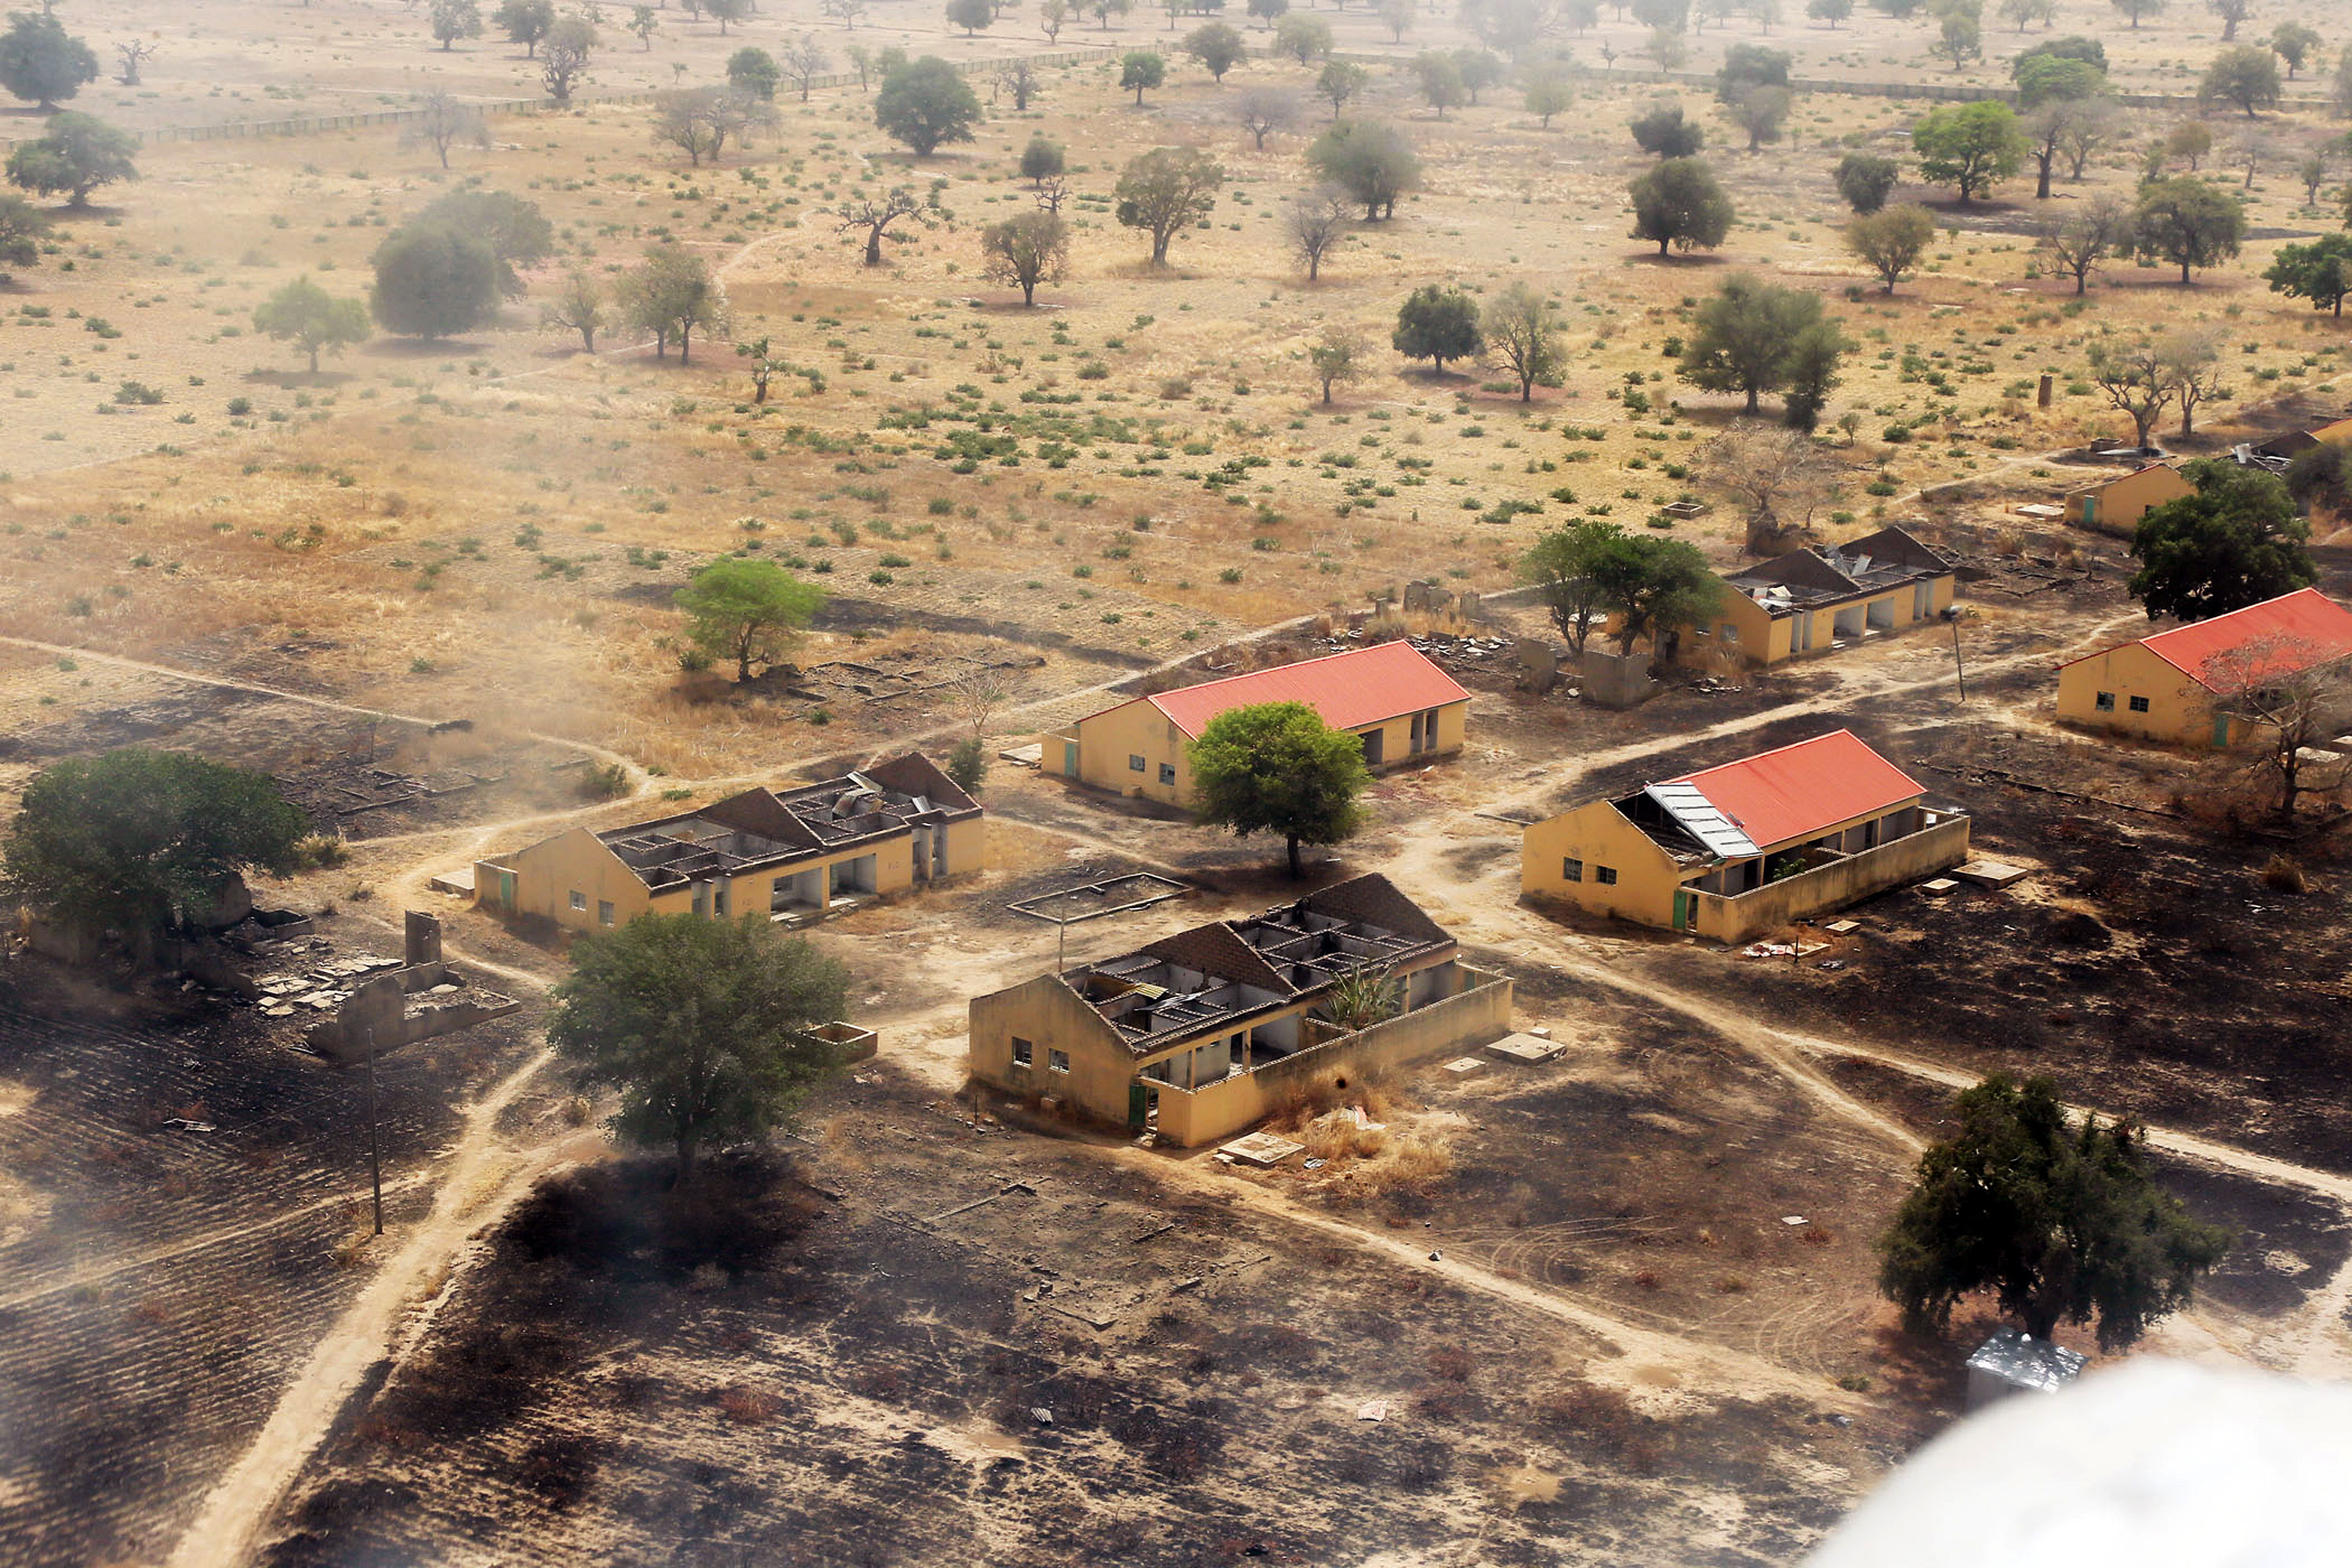 Burnt classrooms of Government Secondary School, Chibok